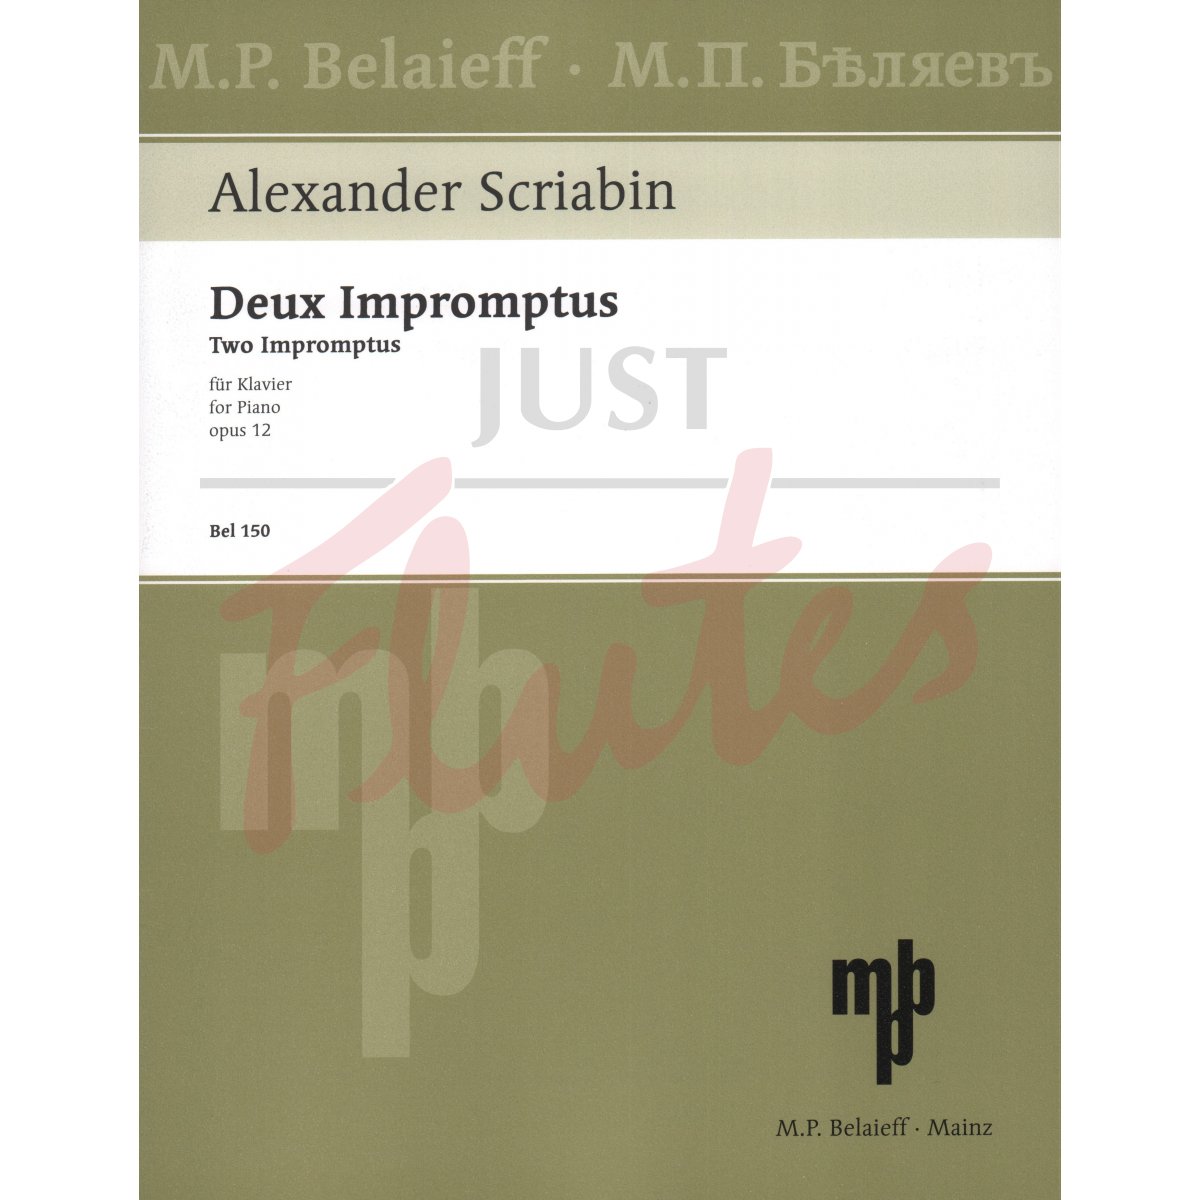 Two Impromptus for Piano